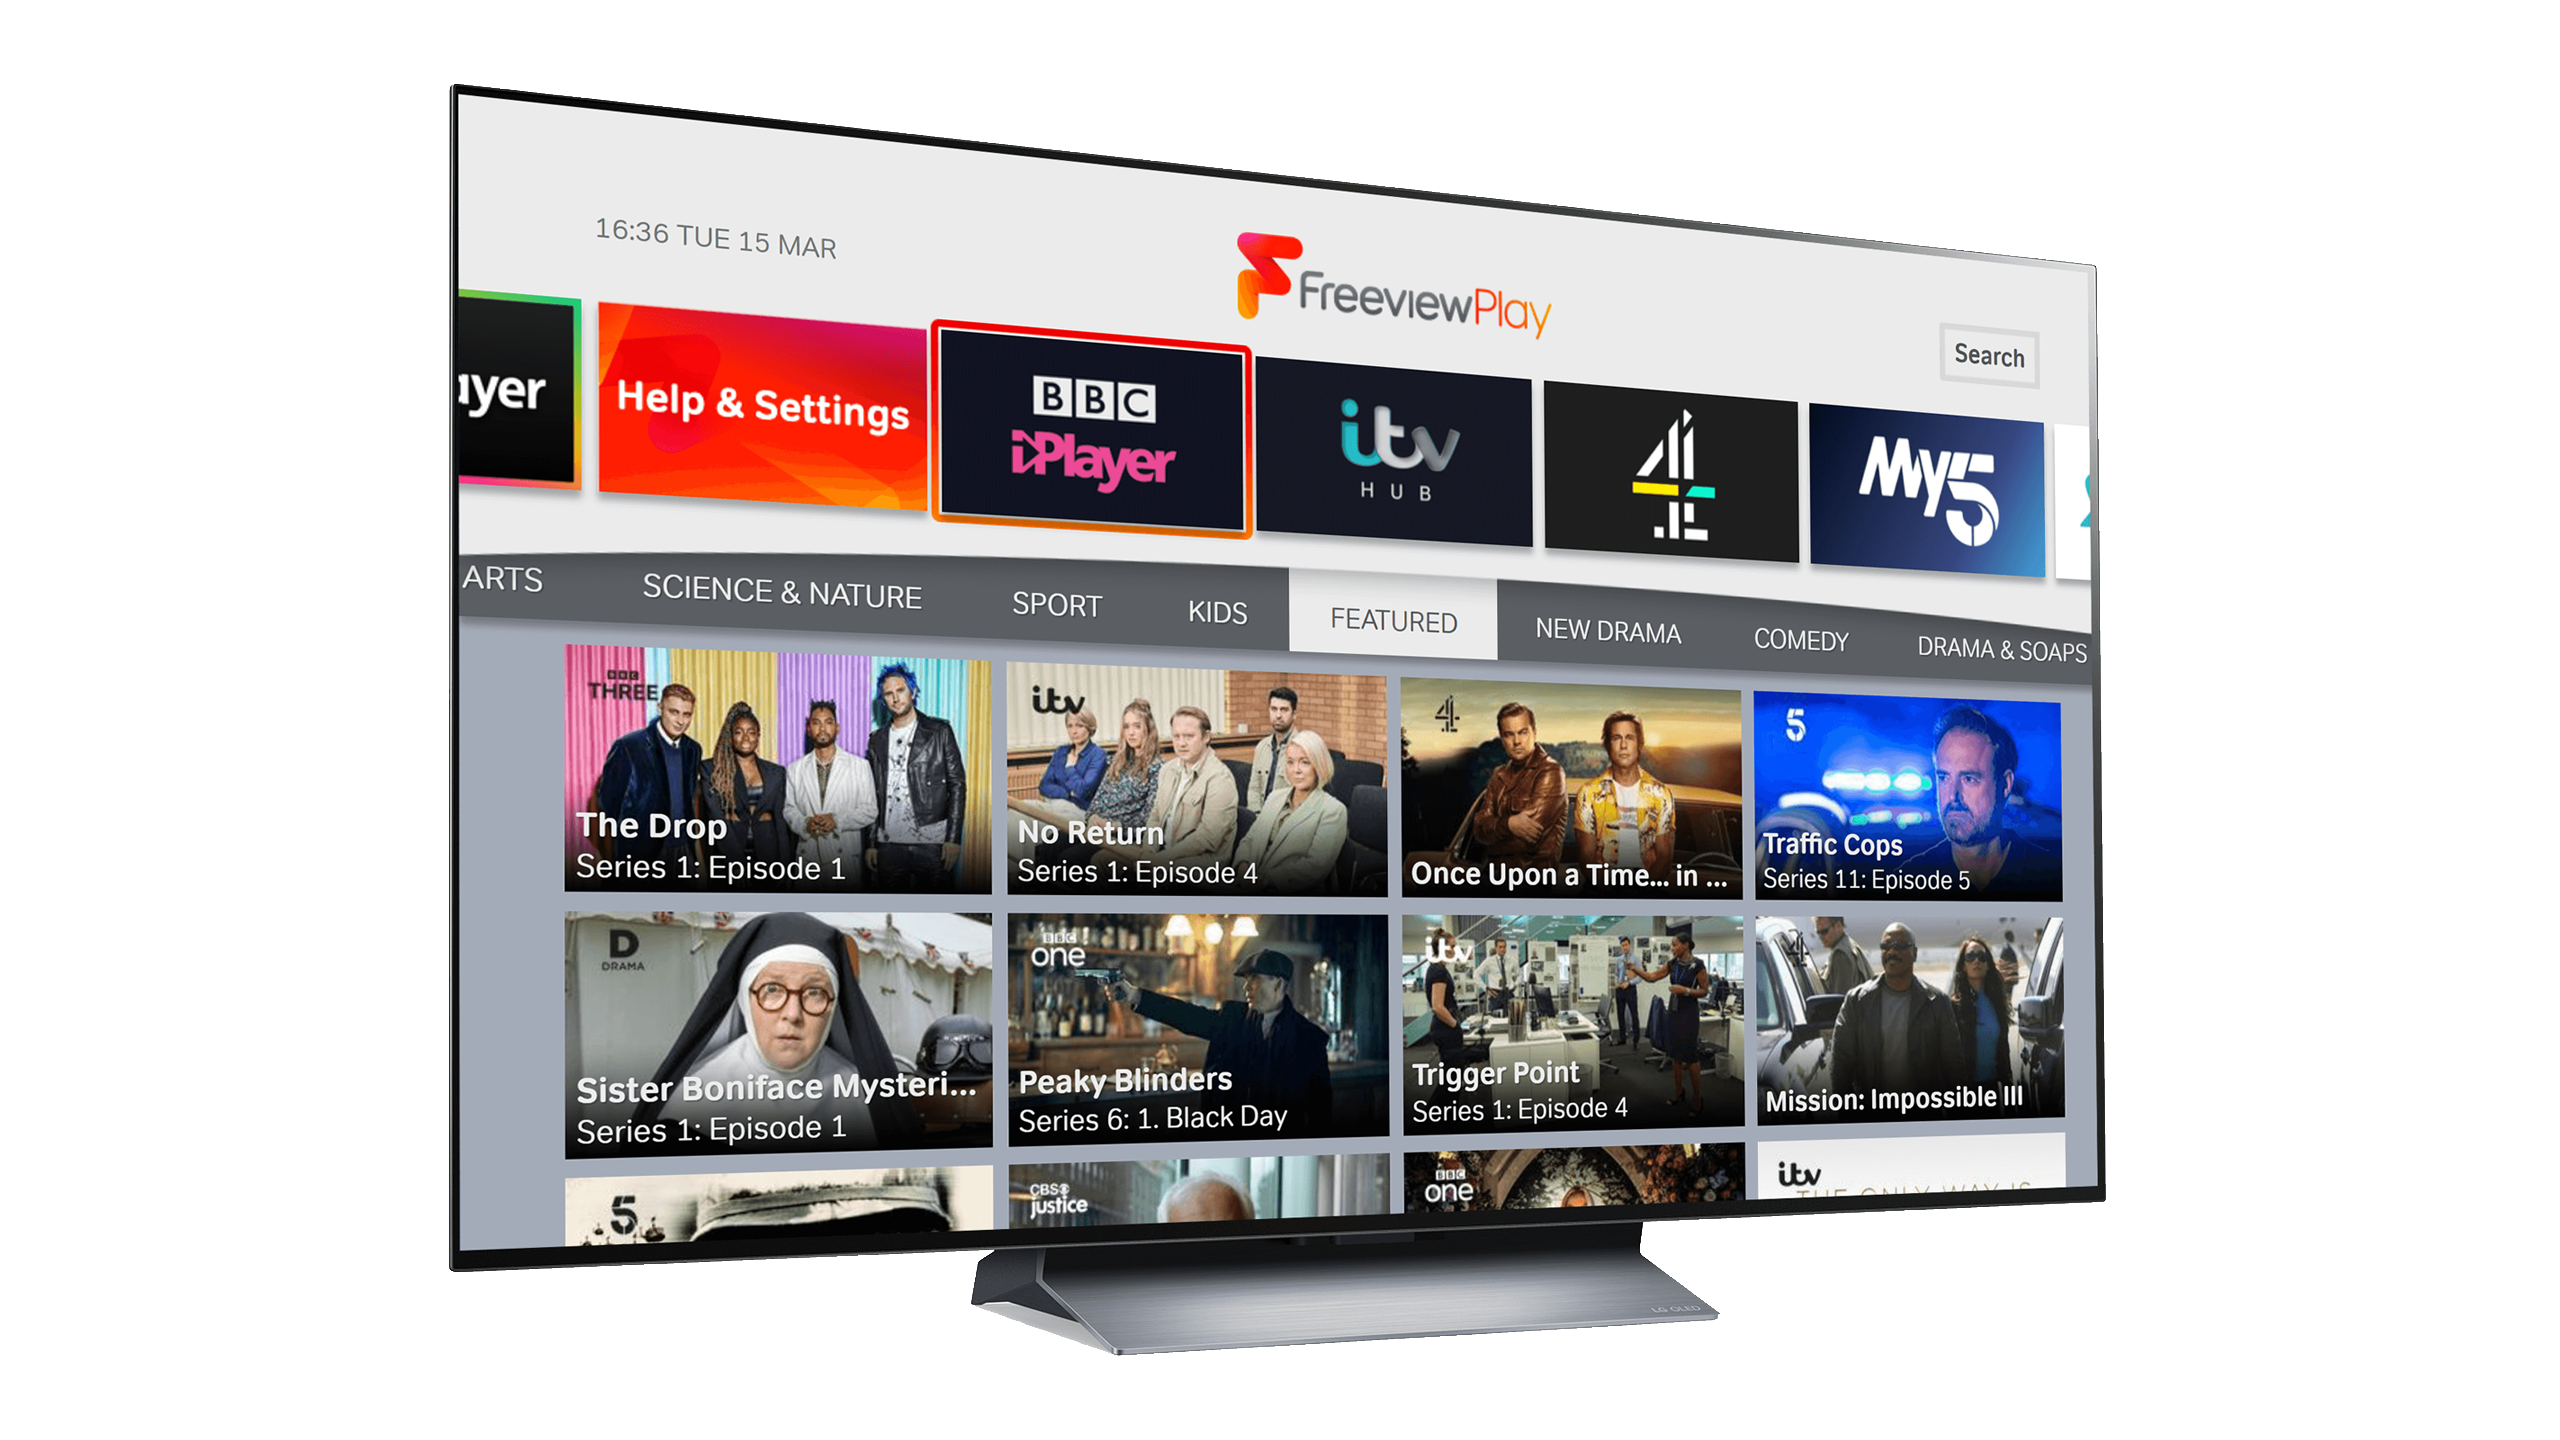 Freeview Play interface on UK TVs from LG Electronics